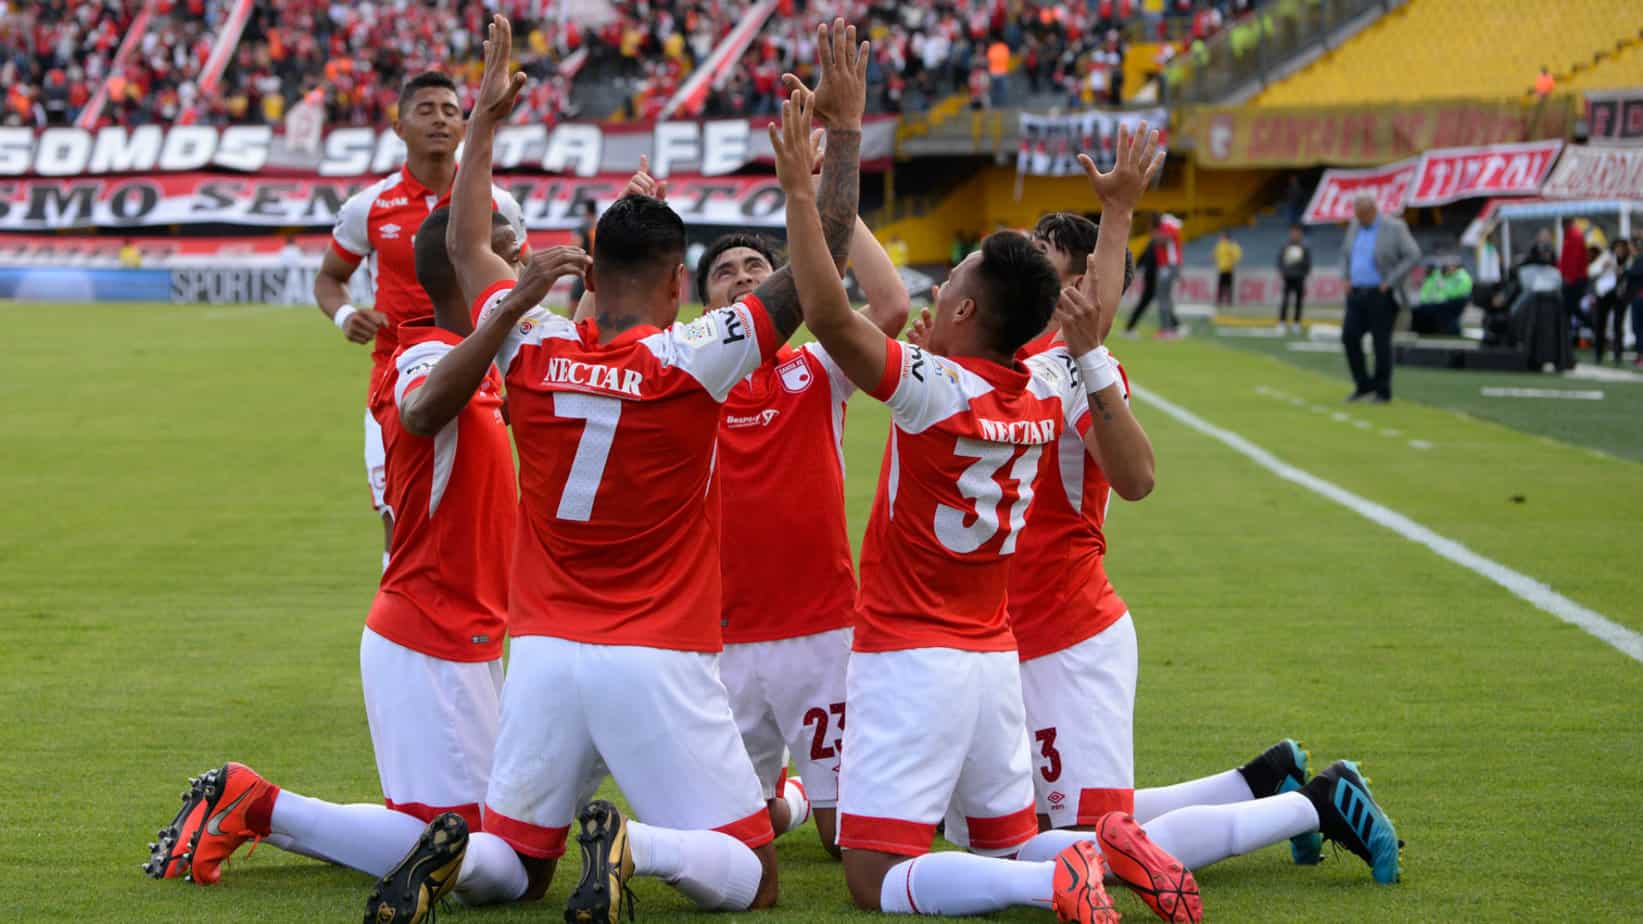 Colombia Dimayor Betplay Matchday 10 – Preview and Free Picks